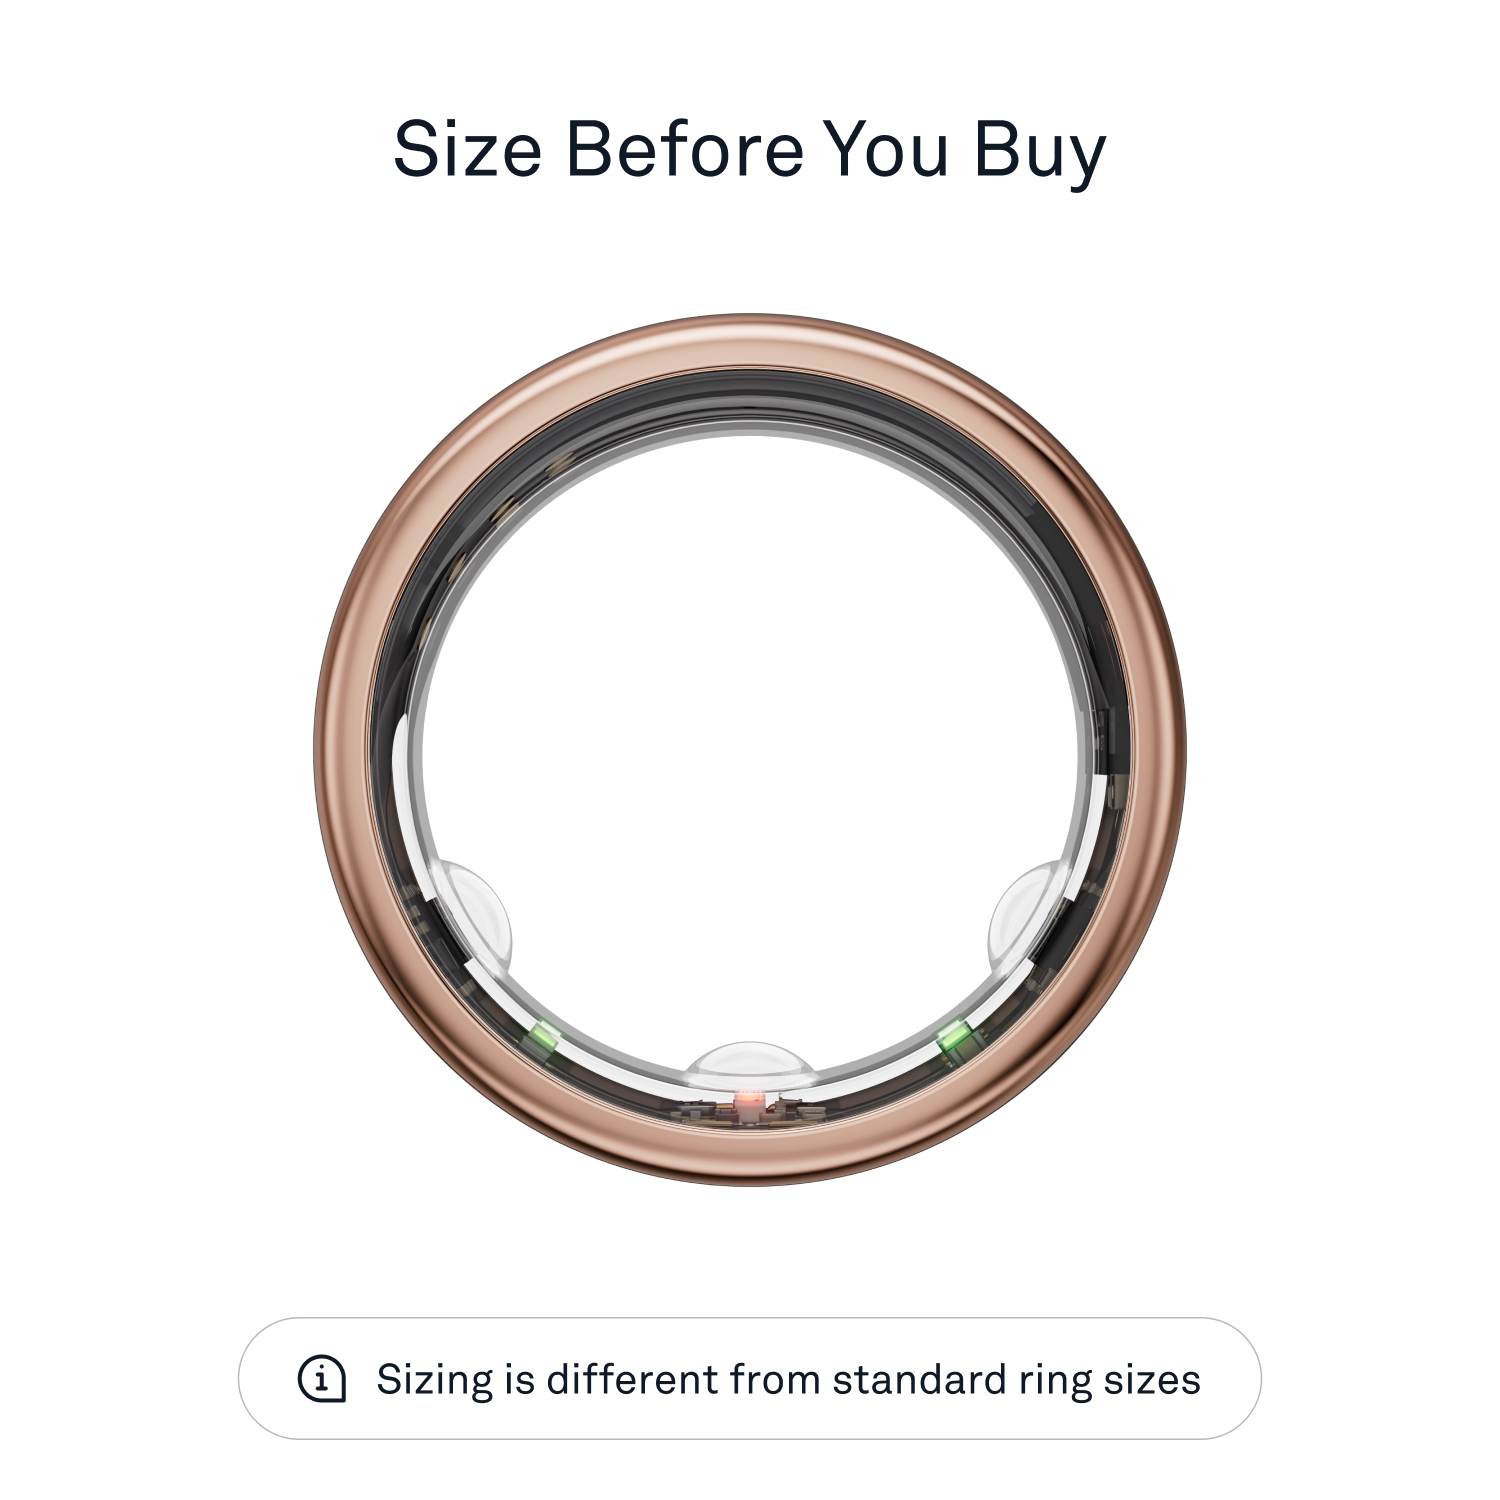 Oura Ring Gen3 Horizon Size Before You Buy Size 11 Rose Gold JZ90-51386-11  - Best Buy